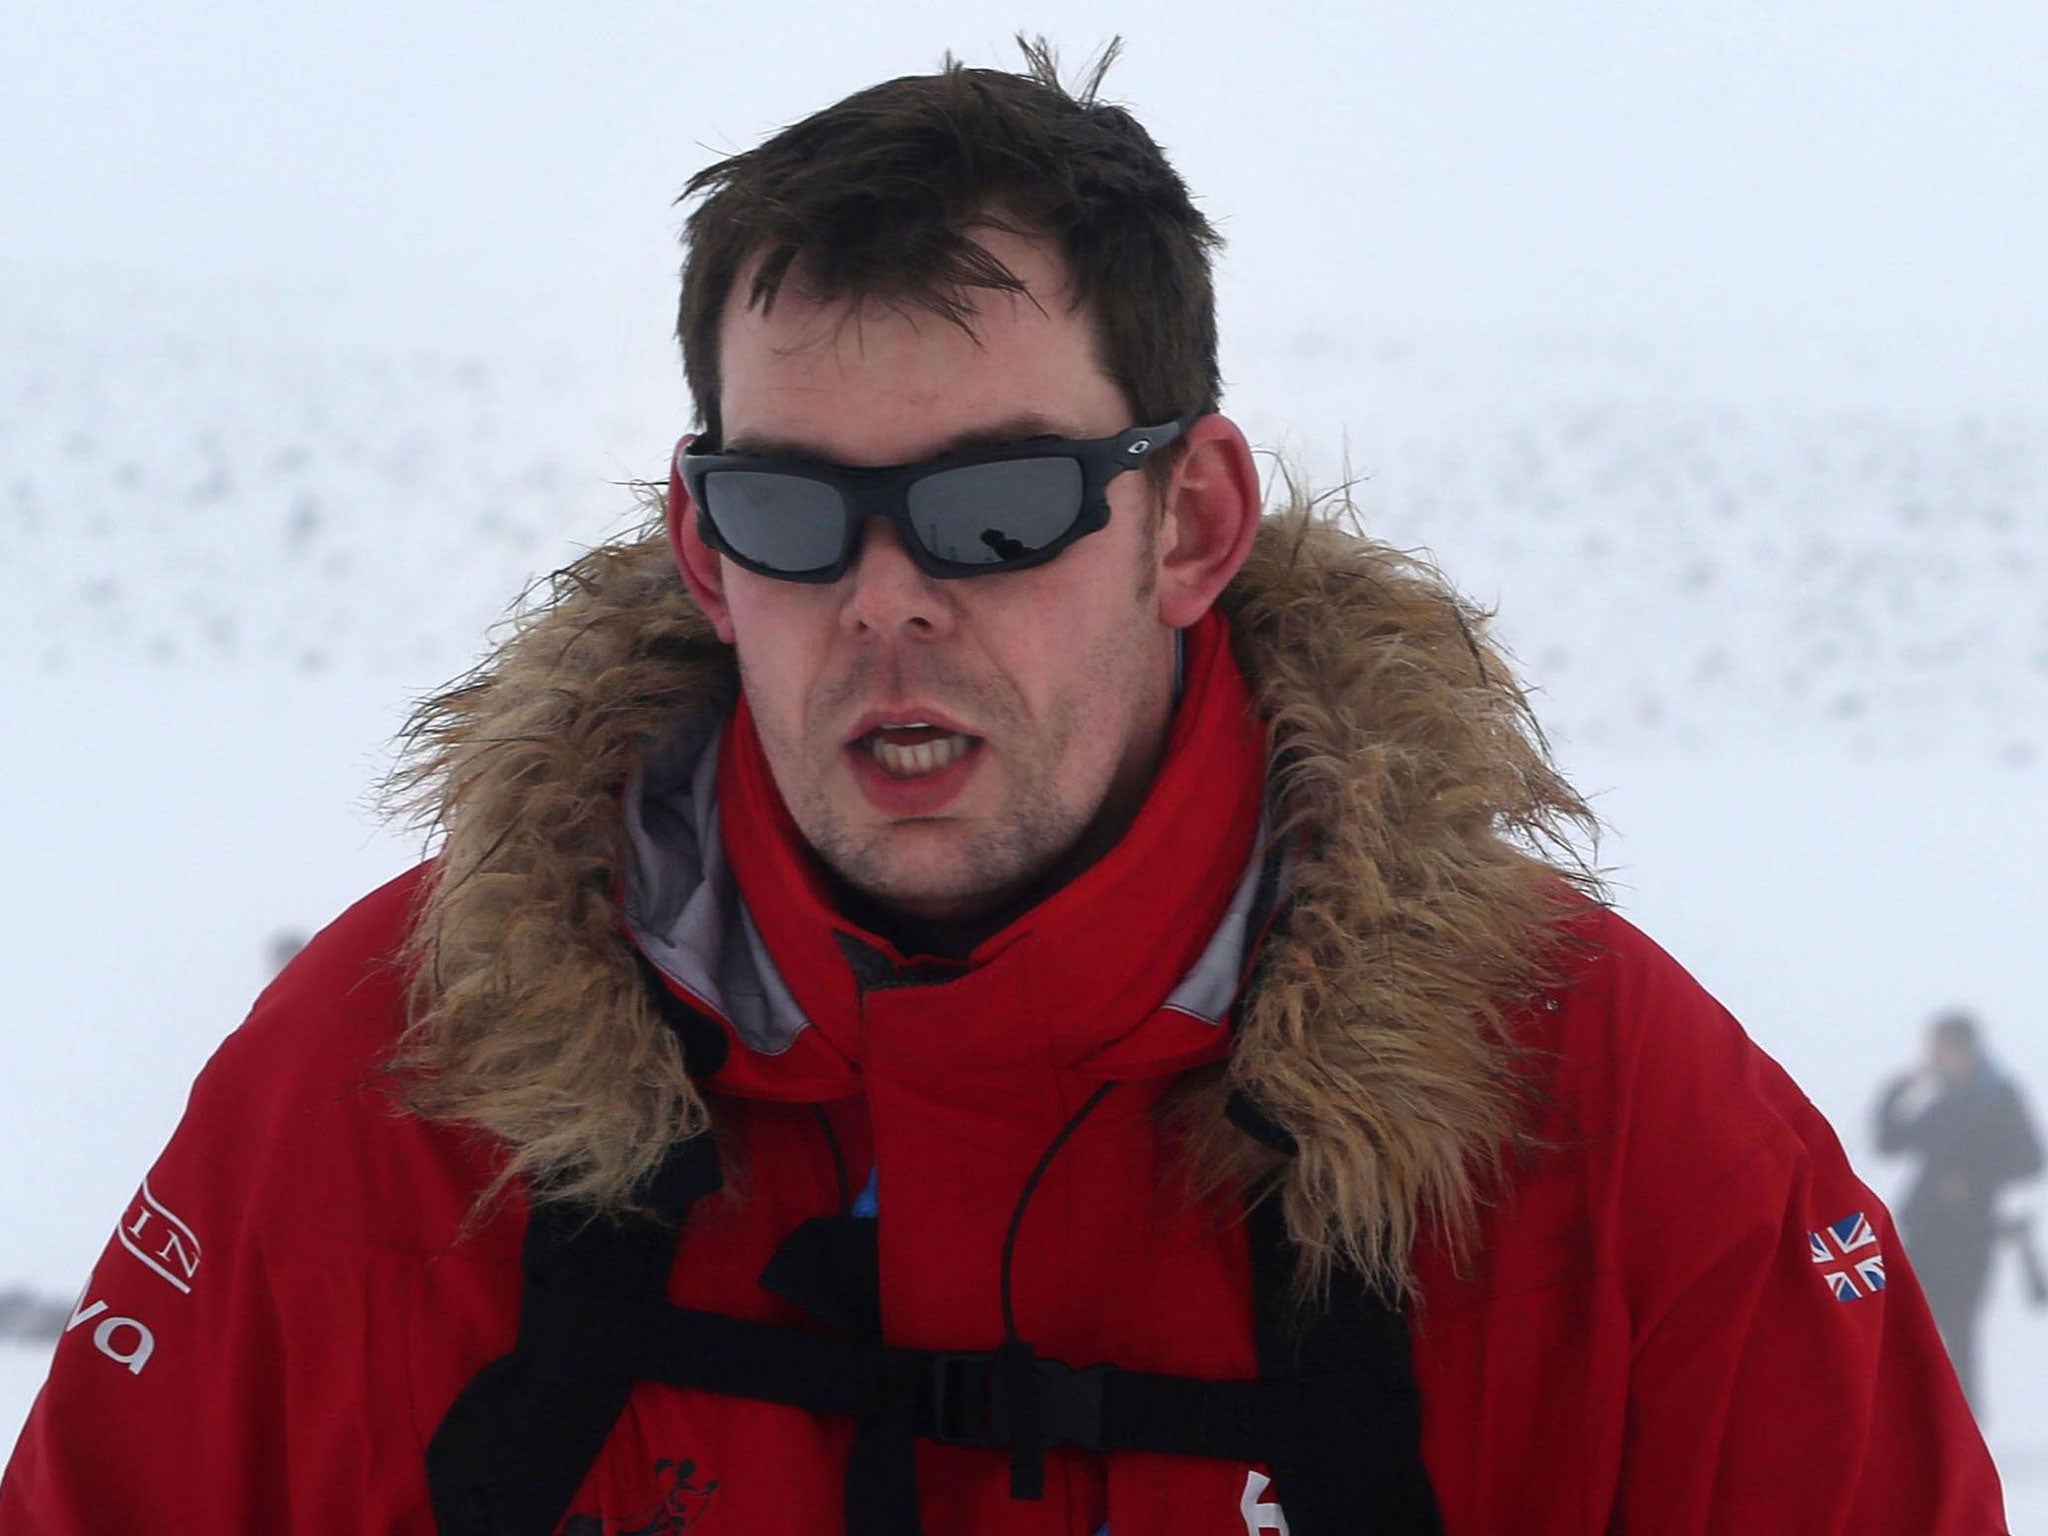 Duncan Slater, who hopes to become the first double-amputee to walk to the South Pole